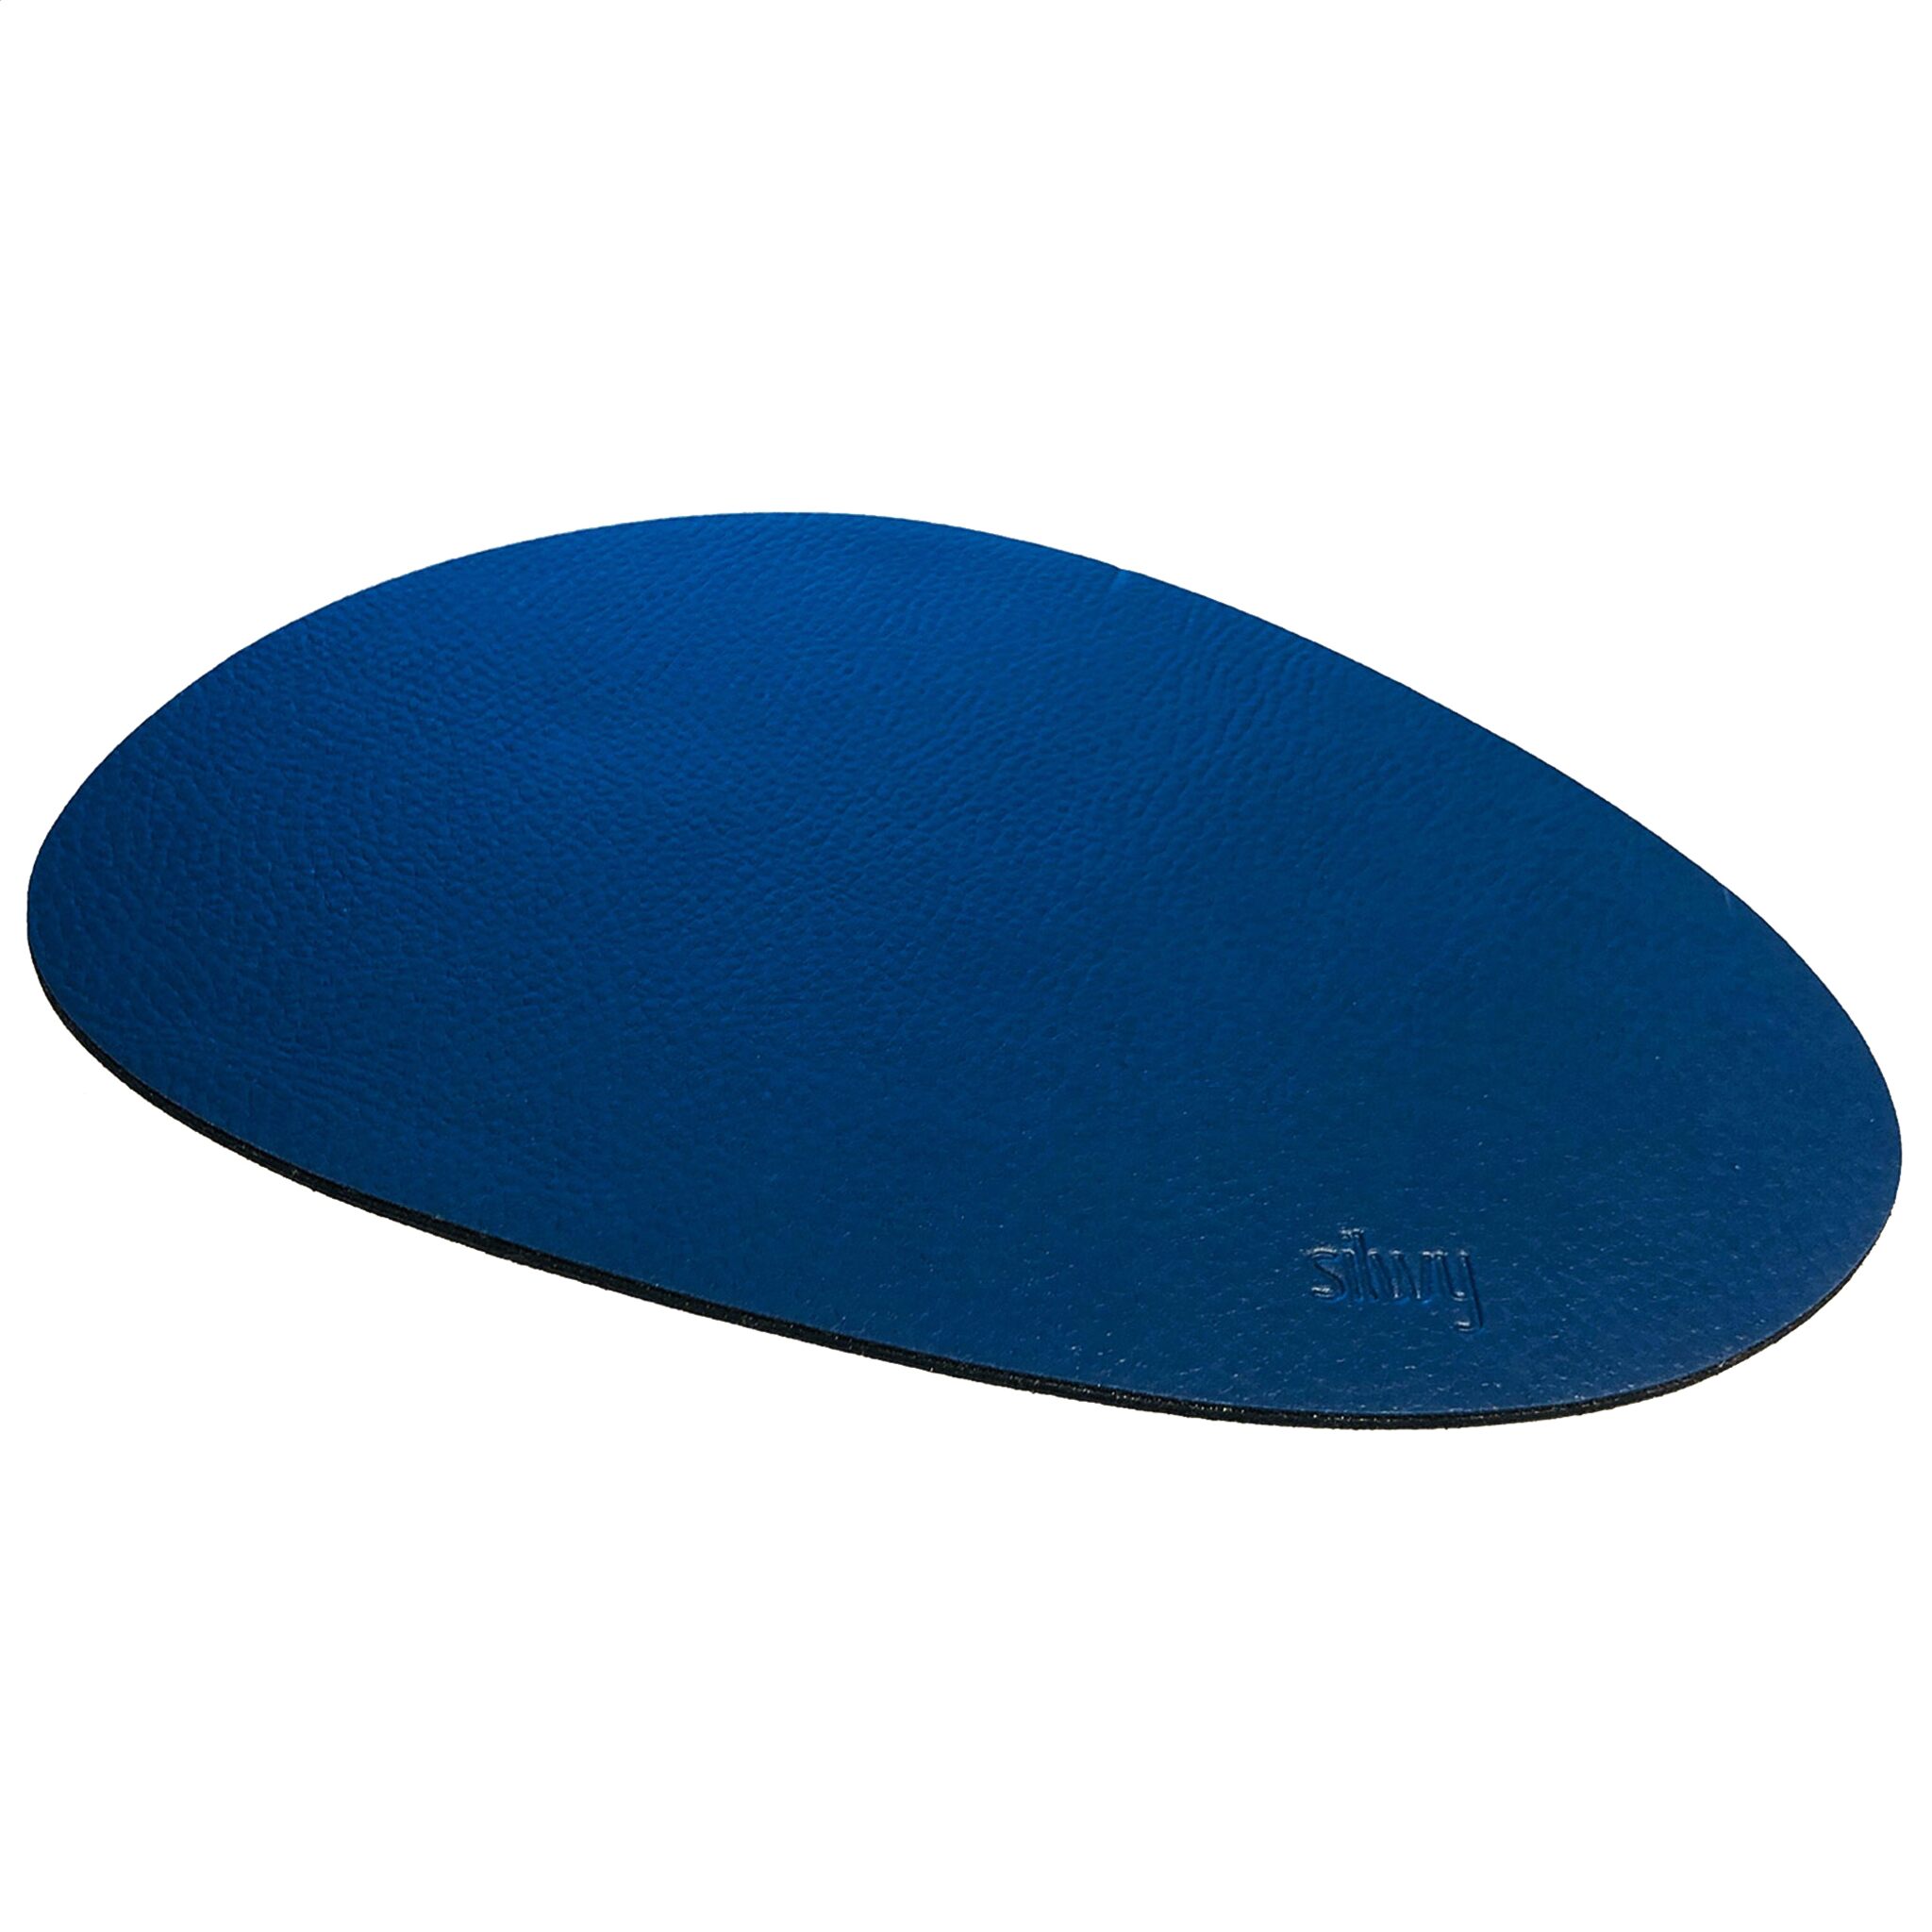 silwy set of 2 metal nano gel pads (free form) with leather coating, blue